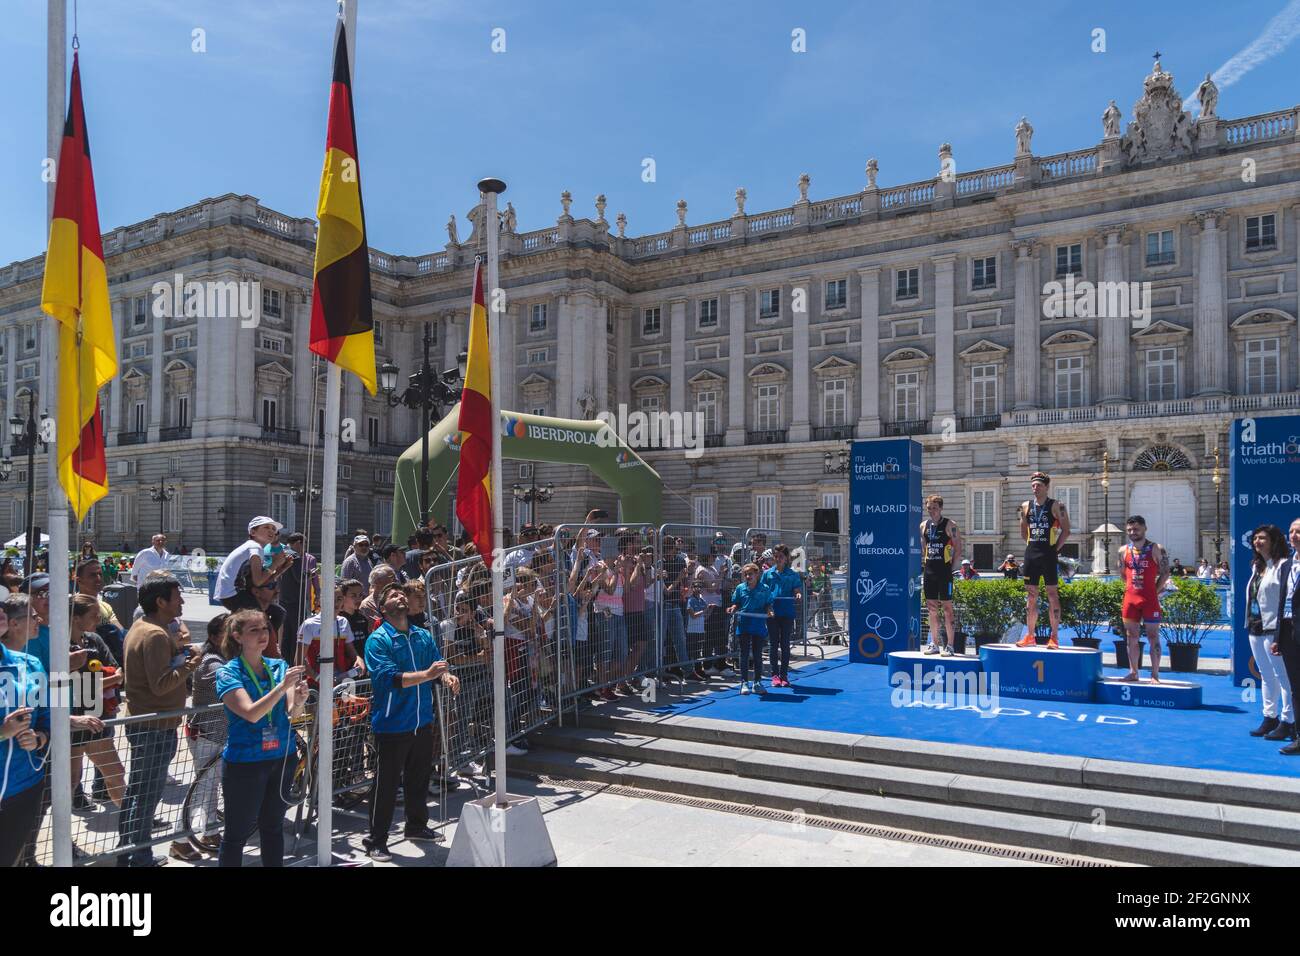 Men's Podium Justus Nieschlag (Germany) 1st place, Lasse Luhrs (Germany) 2nd place, Roberto Sanchez Mantecon (Spain) 3rd place during the 2019 Madrid ITU Triathlon World Cup, qualifier for the olympic games on May 5, 2019 in Madrid, Spain - Photo Arturo Baldasano / DPPI Stock Photo